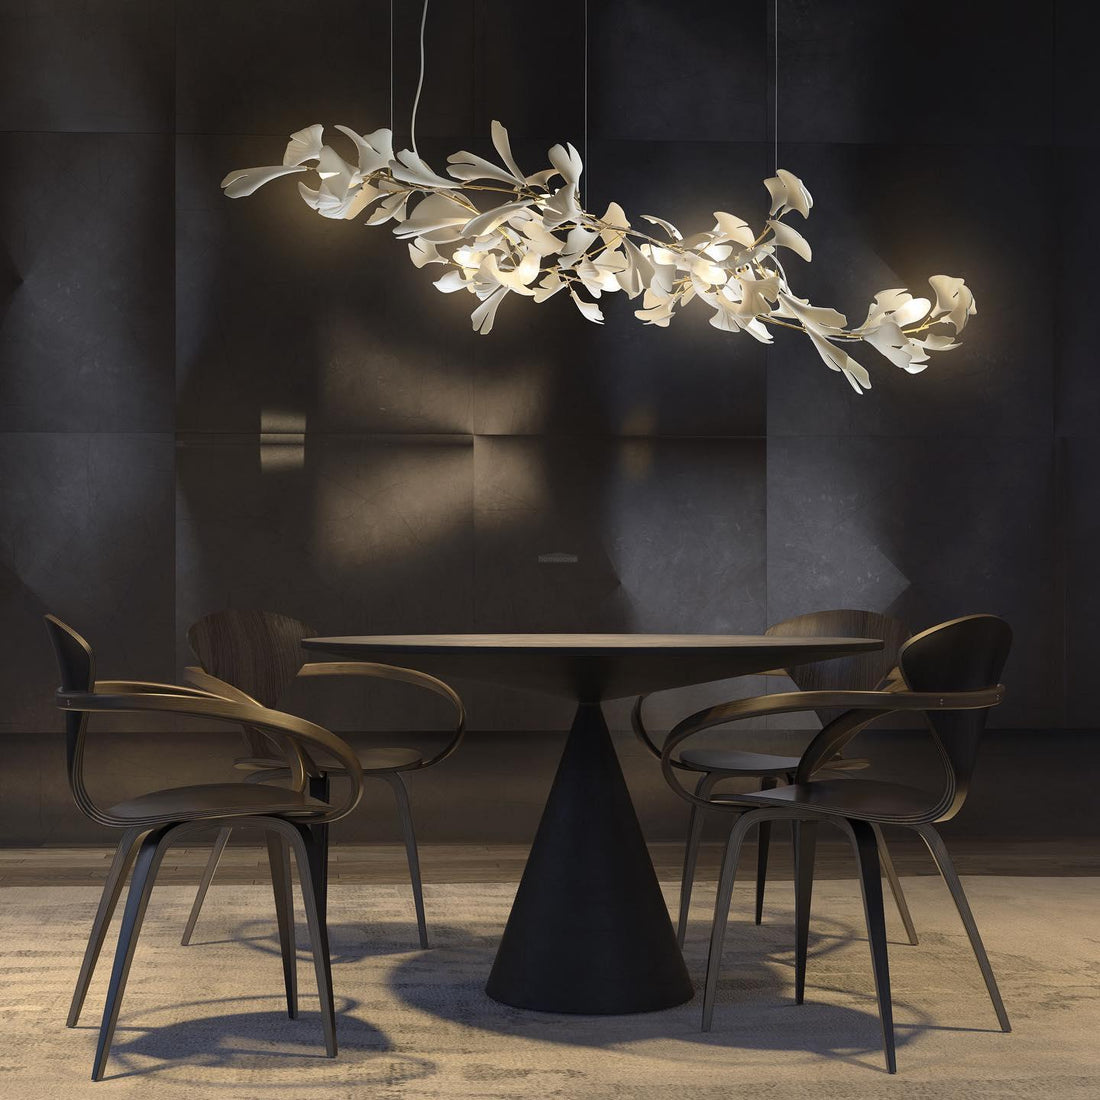 Gingko Chandelier Style A